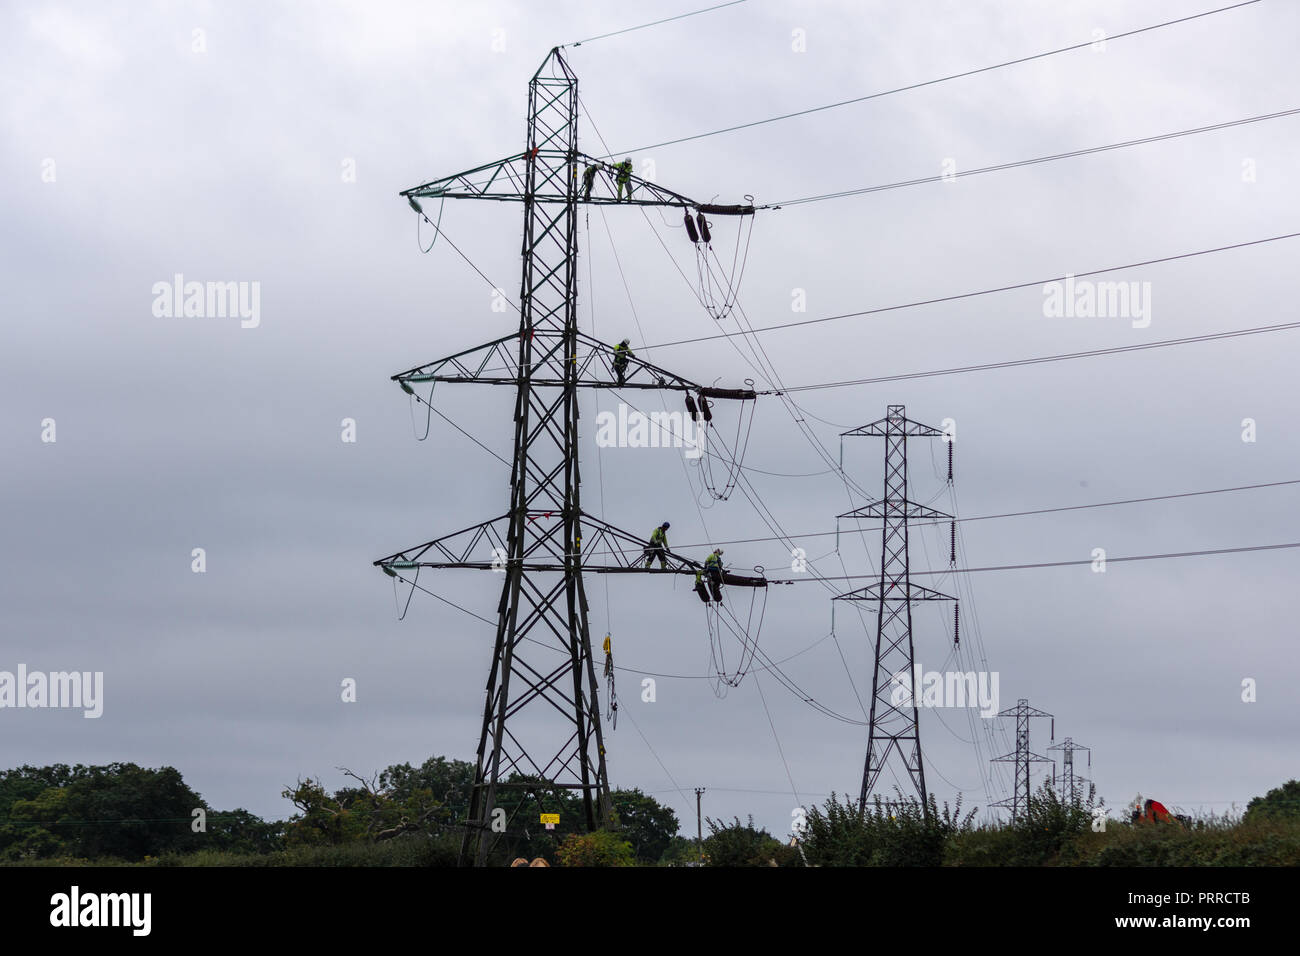 Electricity workers wearing safety harnesses on an electricity pylon in the process of replacing the high voltage cables Stock Photo